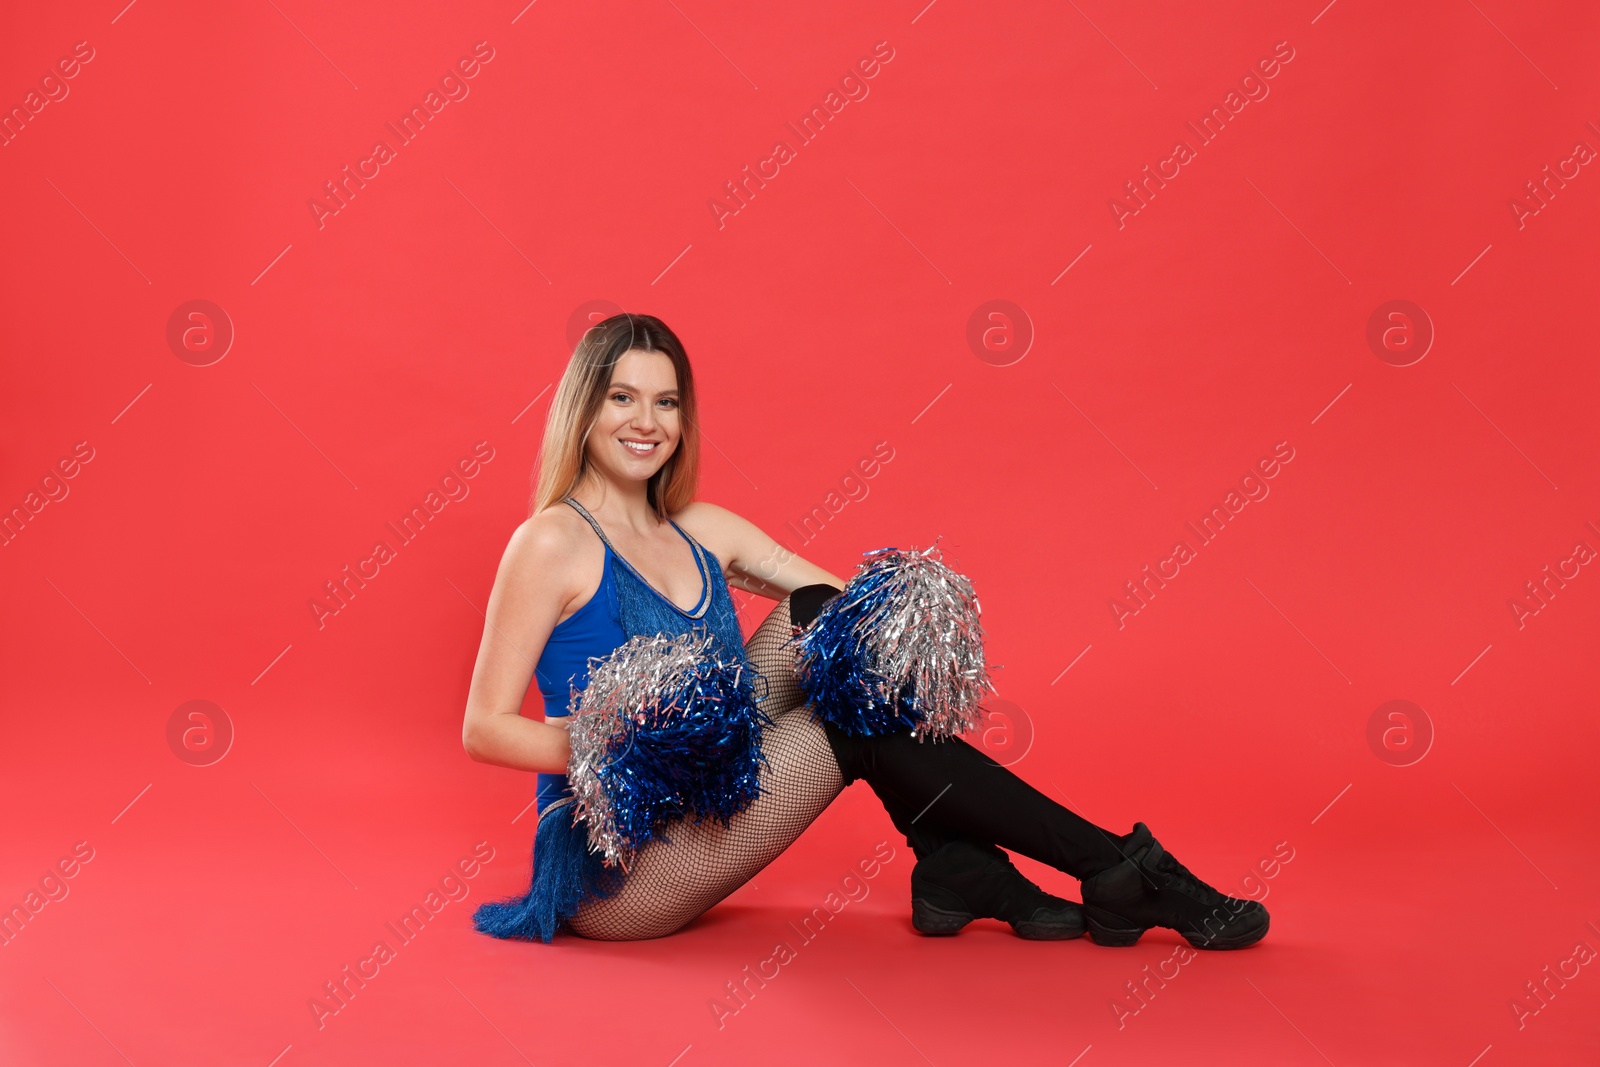 Photo of Beautiful cheerleader in costume holding pom poms on red background